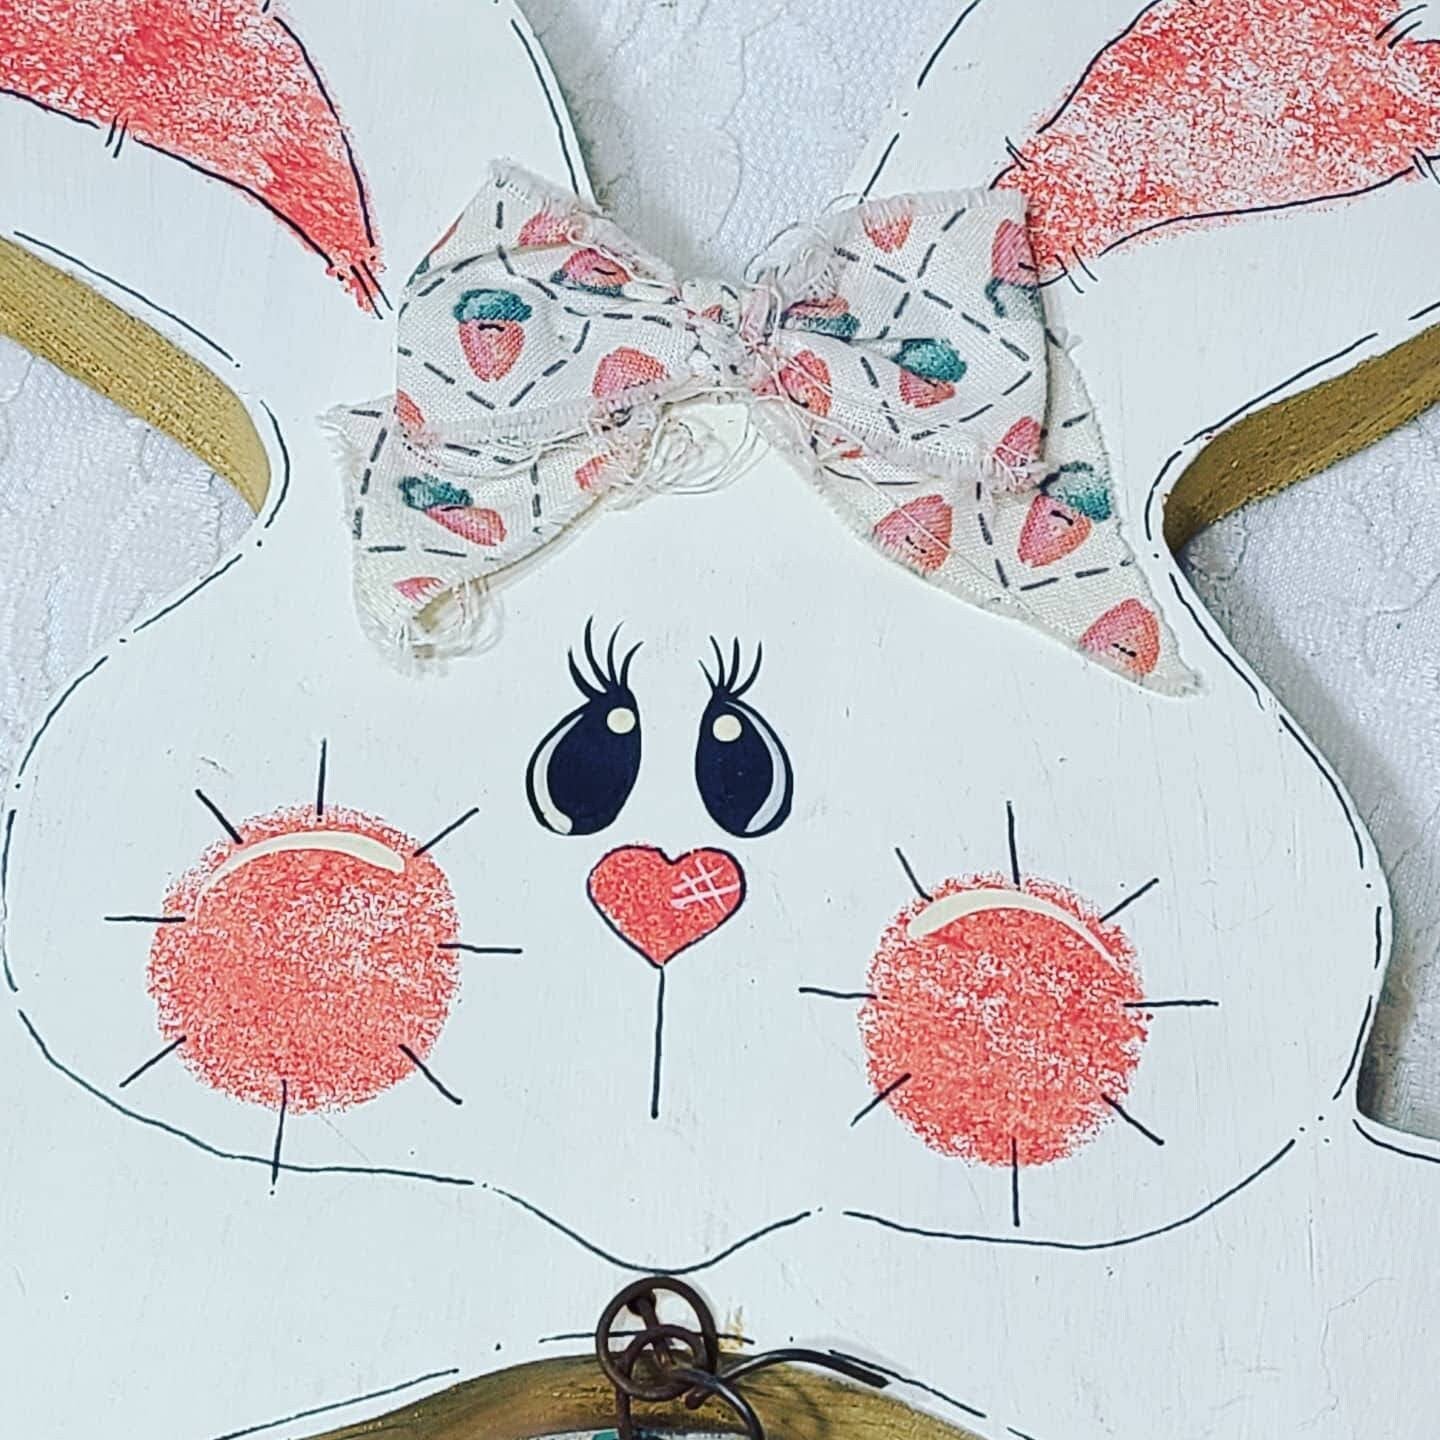 Easter Decorations Wooden Tole Painted Handmade Primitive Shabby Bunny with Carrots ~ Wall Hanging Wood Ornament ~ OOAK Art